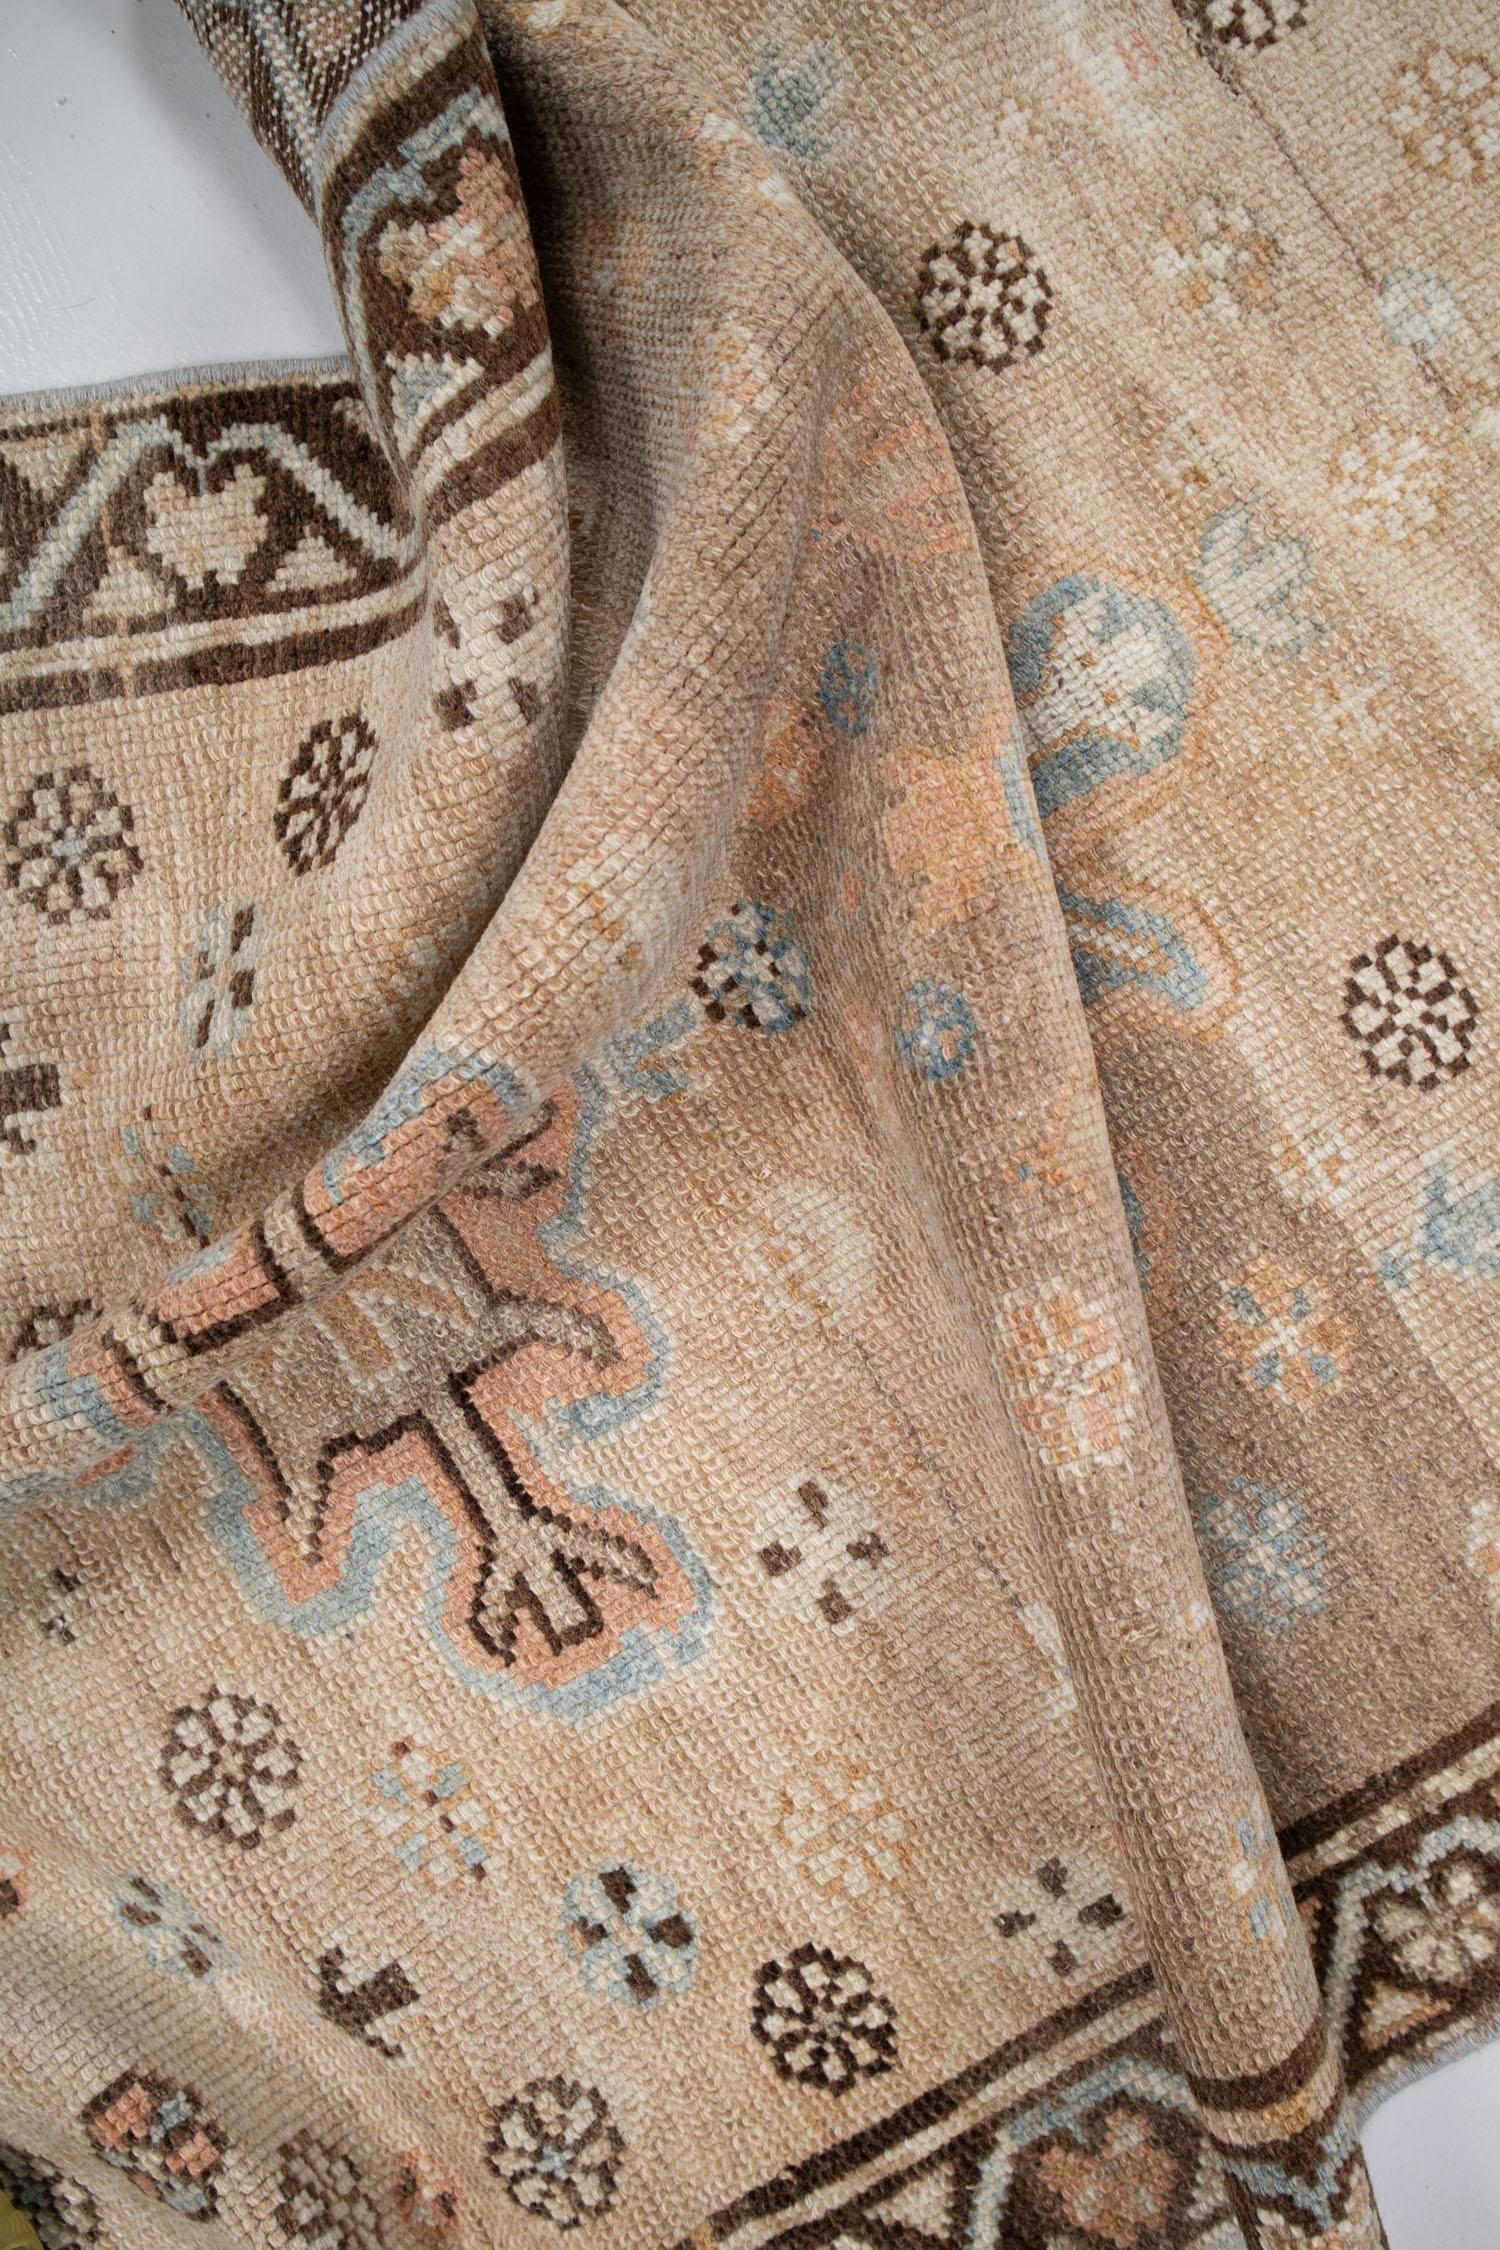 Wool Antique Camel Hair Sarab Rug S-R5541 For Sale